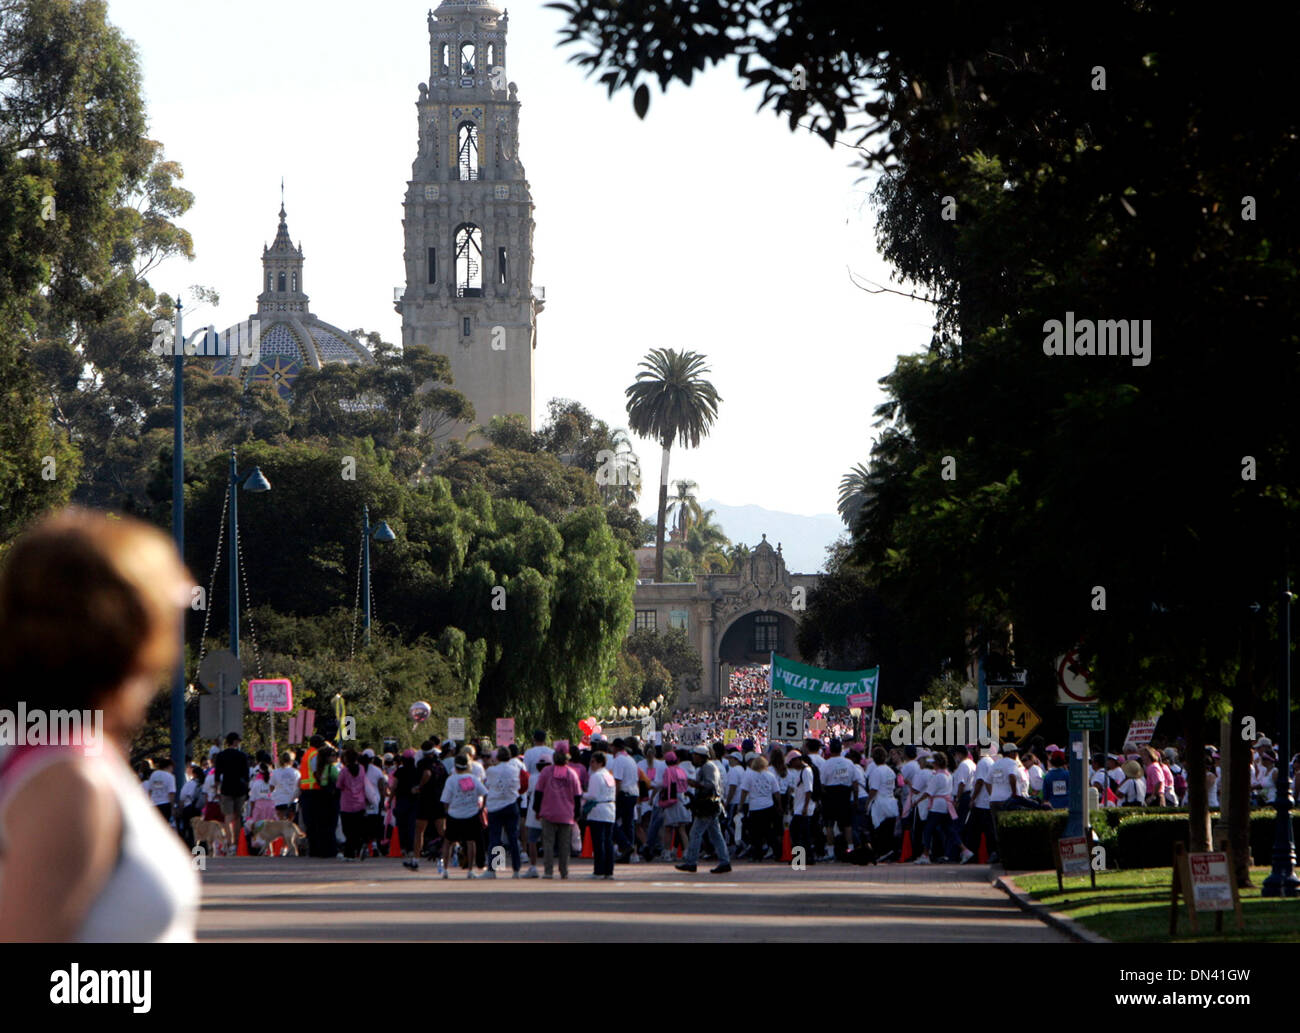 Nov 05, 2006; San Diego, CA, USA; A participant in the Susan G. Komen Race for the Cure, glances down El Prado where runners and walkers clog the Cabrillo Bridge in Balboa Park during the Sunday event, which was held in Hillcrest on November 5. Mandatory Credit: Photo by Laura Embry/San Diego Union-Tribune/ZUMA Press. (©) Copyright 2006 by San Diego Union-Tribune Stock Photo